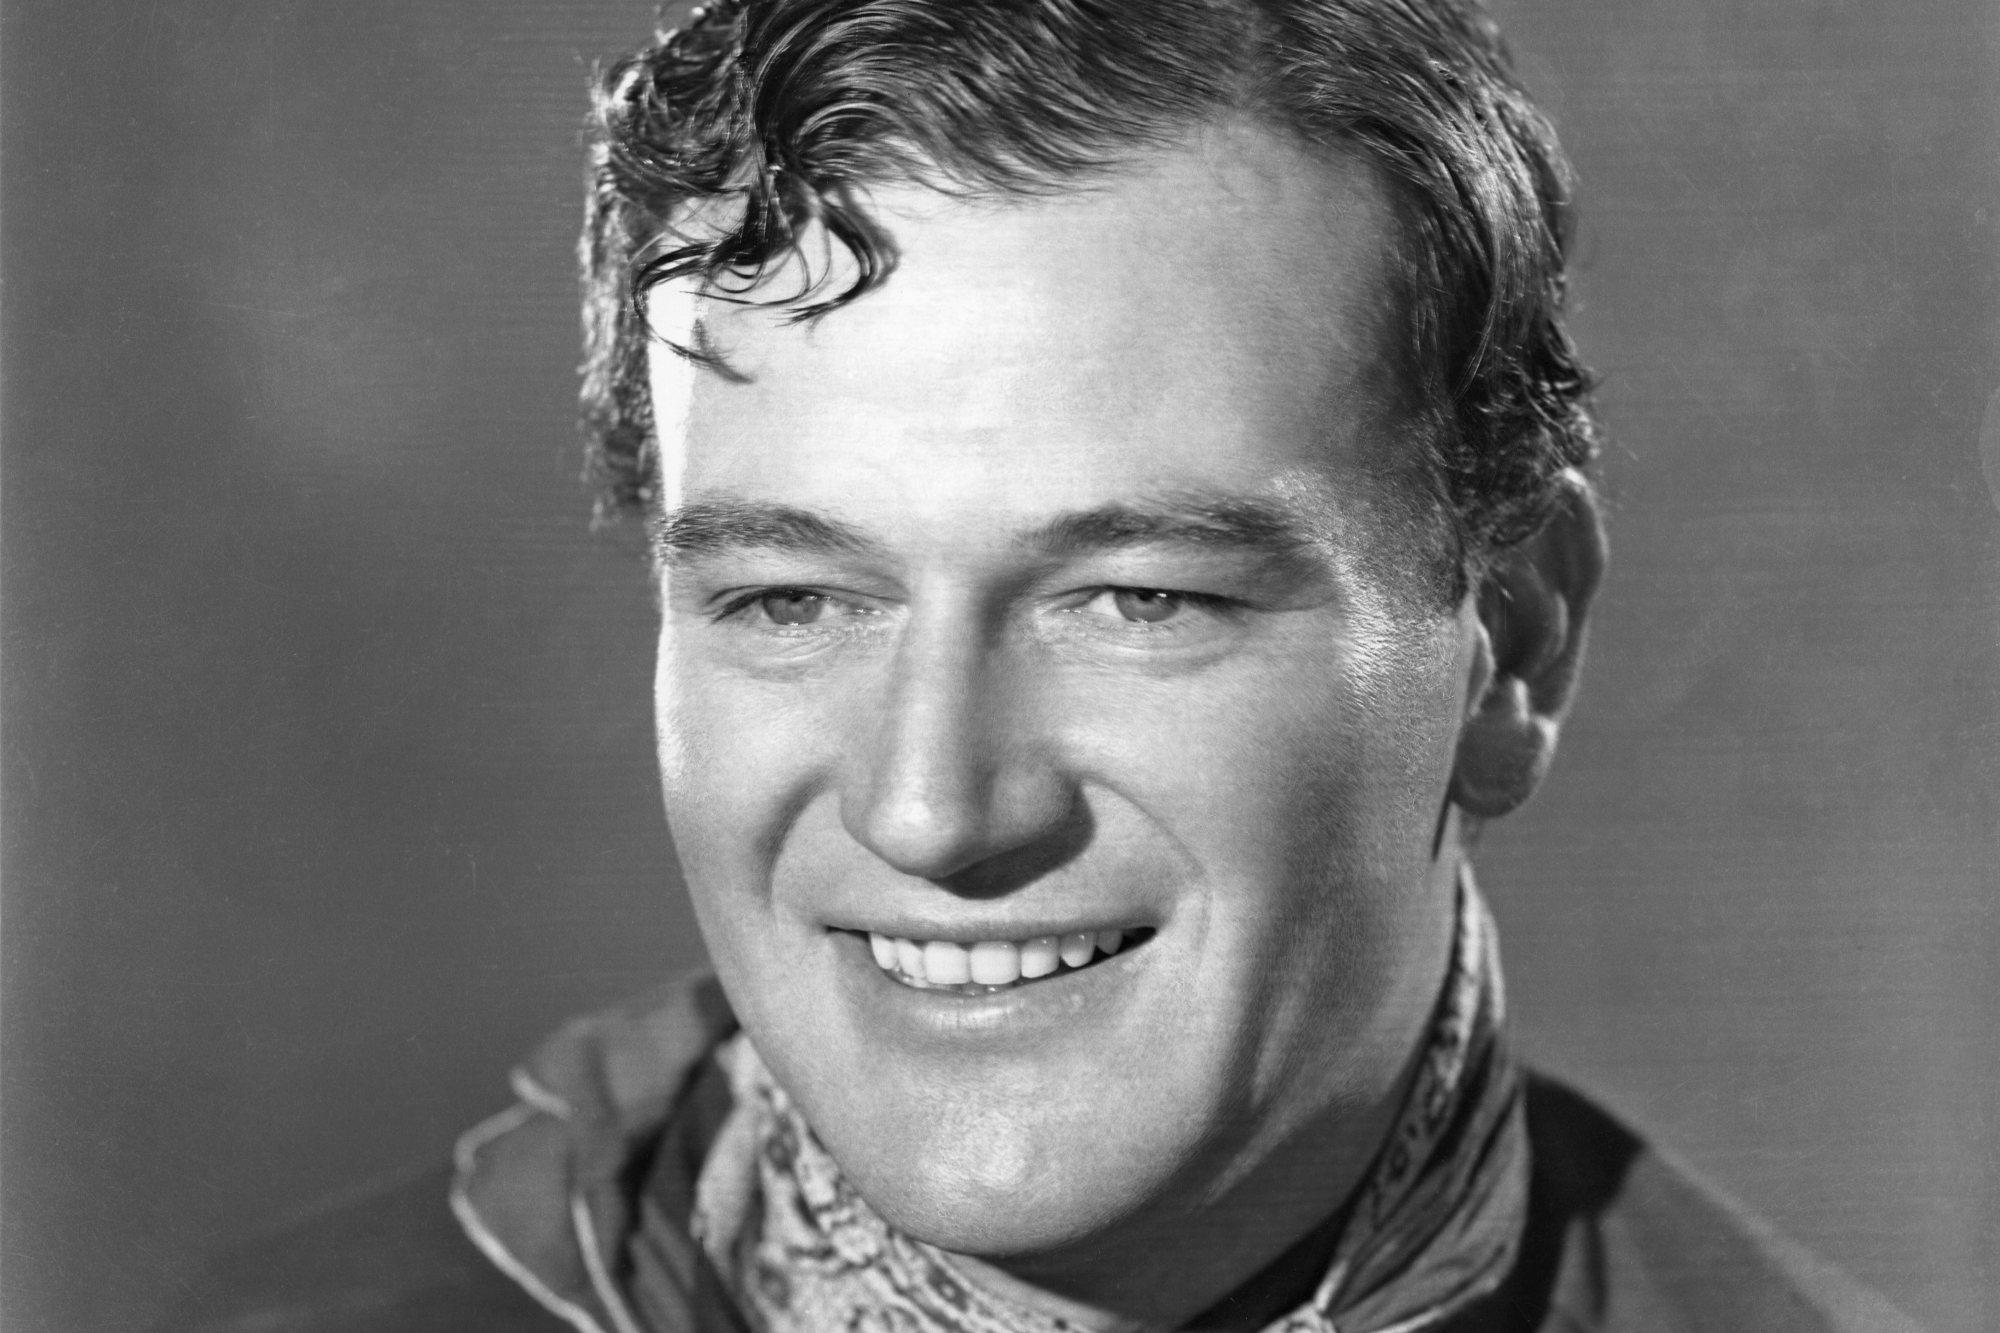 'Stagecoach' actor John Wayne in a black-and-white portrait smiling.